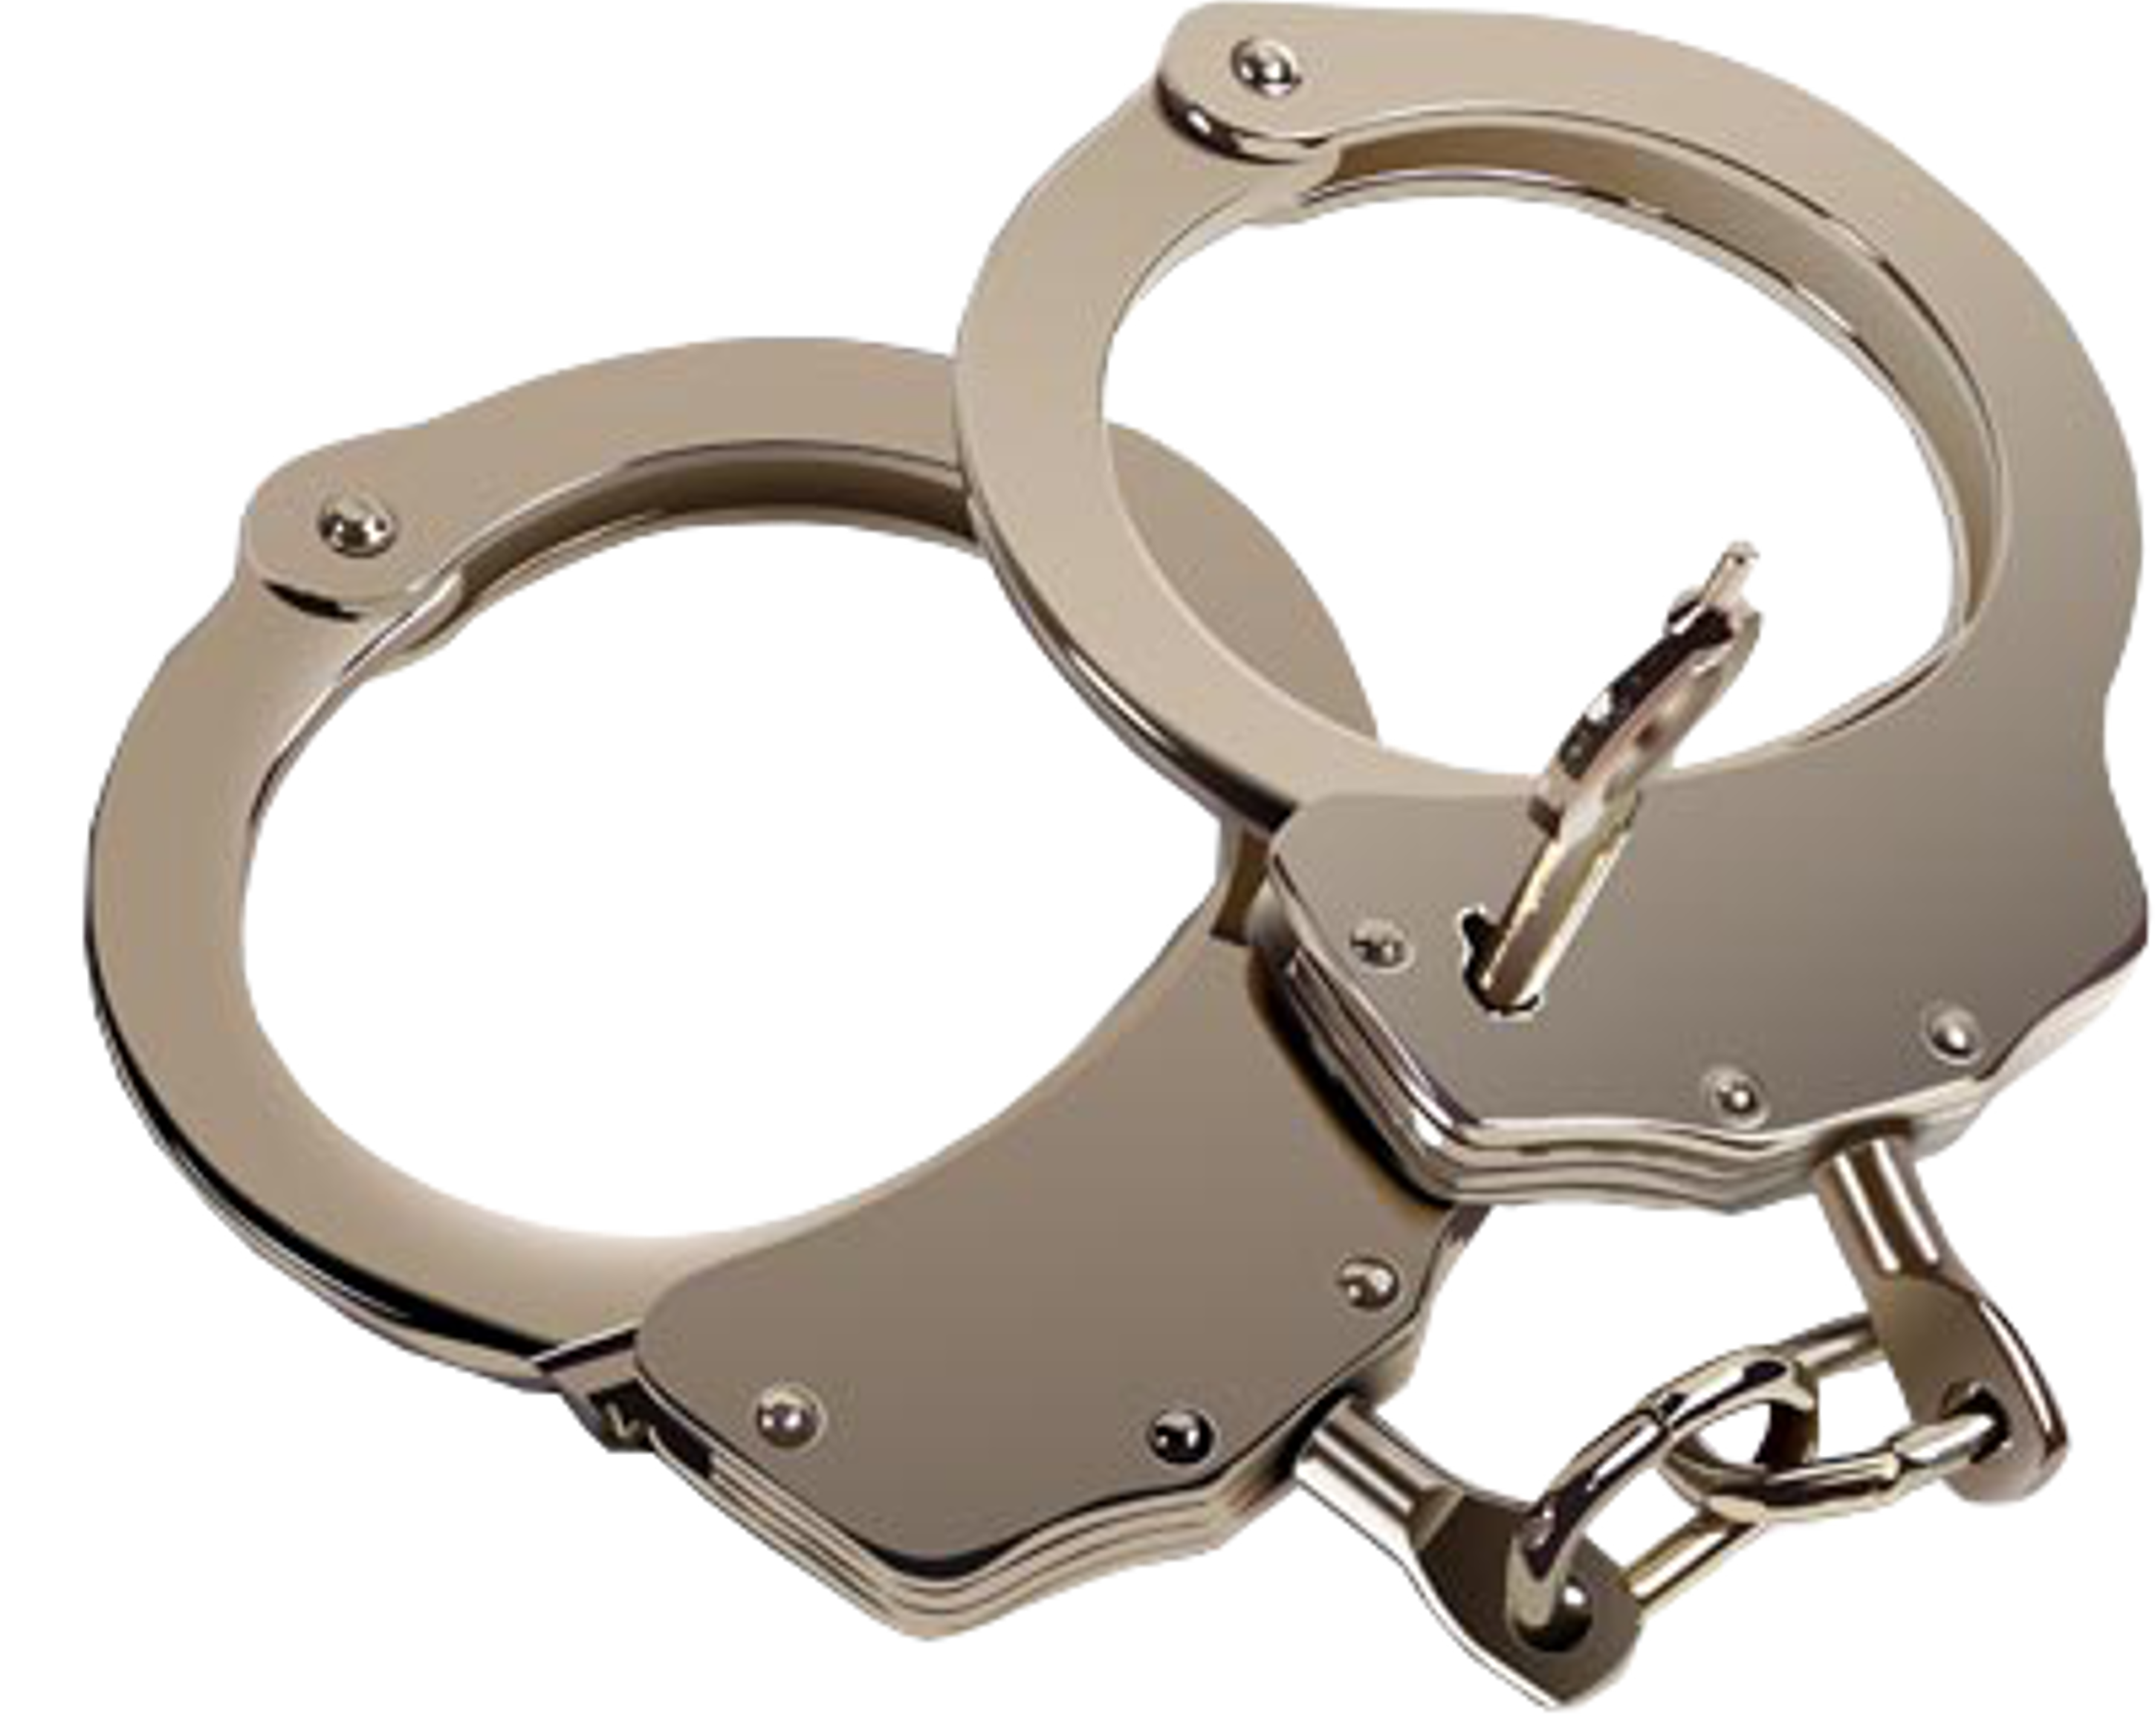 Handcuffs PNG images free download.